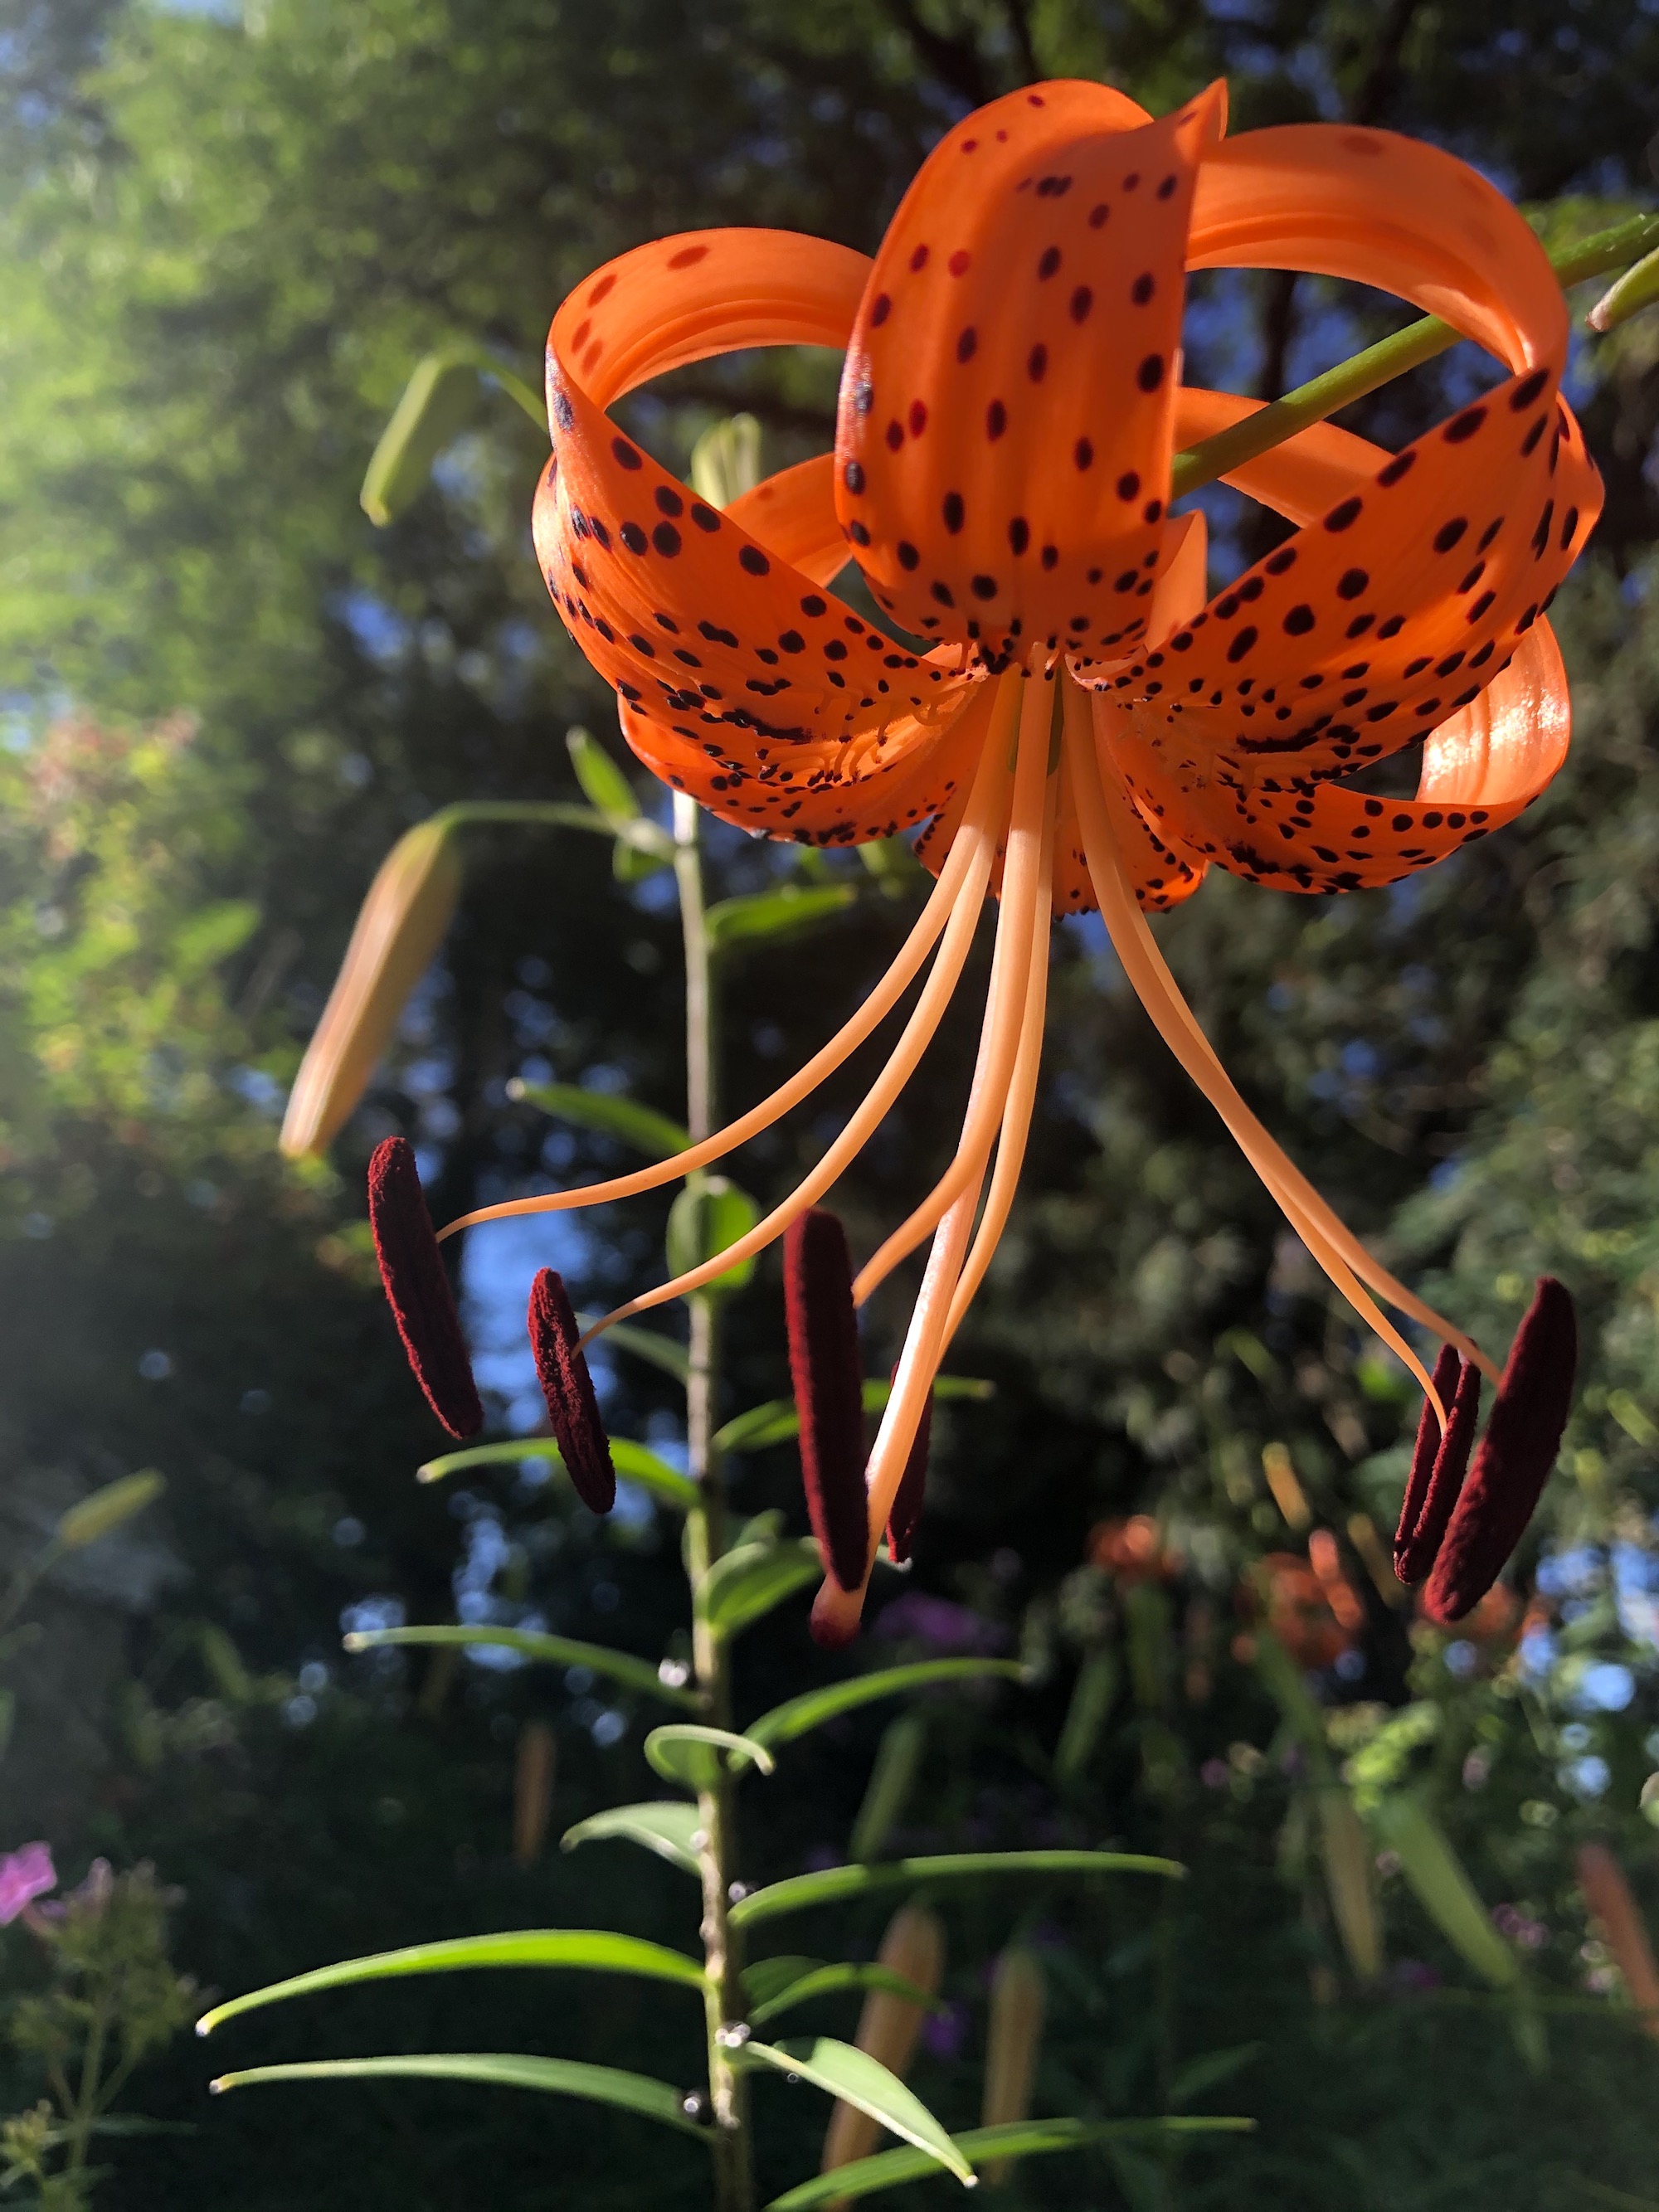 Tiger Lily near the Duck Pond on July 20, 2020.